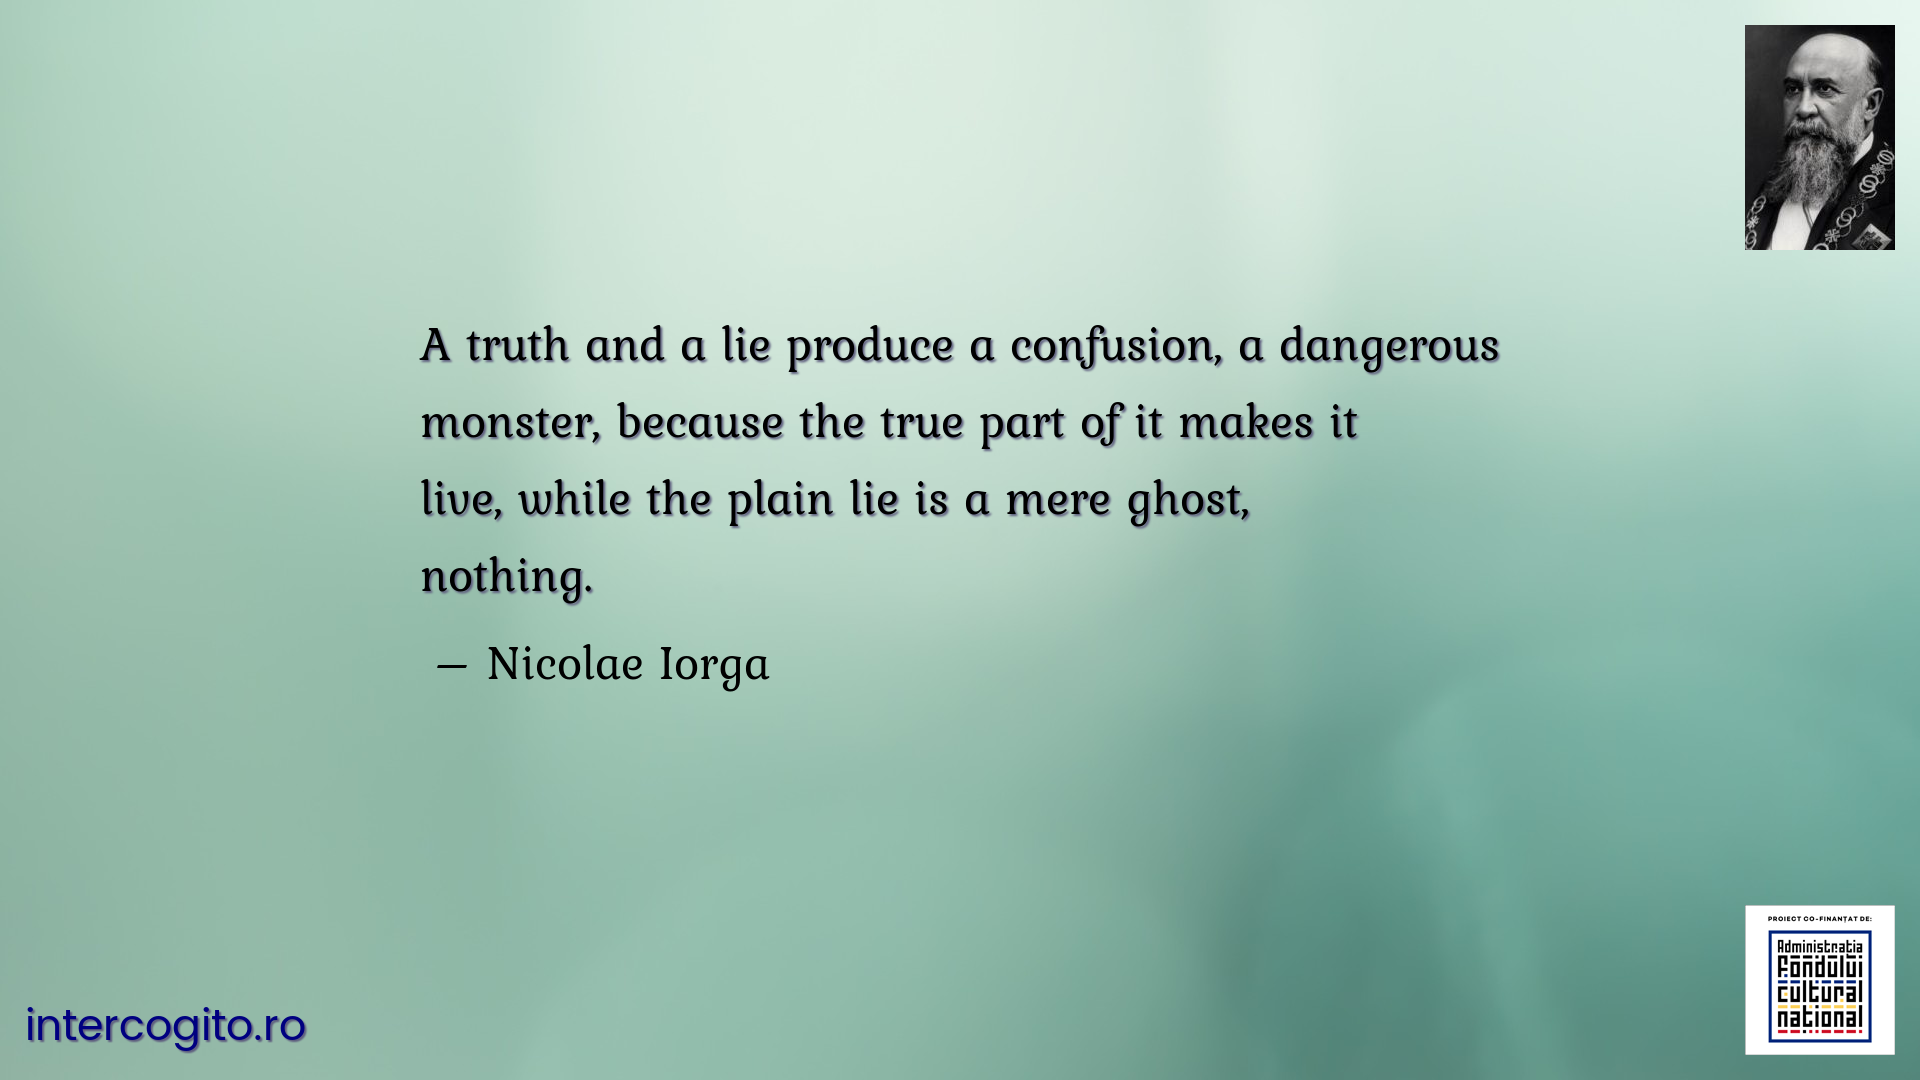 A truth and a lie produce a confusion, a dangerous monster, because the true part of it makes it live, while the plain lie is a mere ghost, nothing.